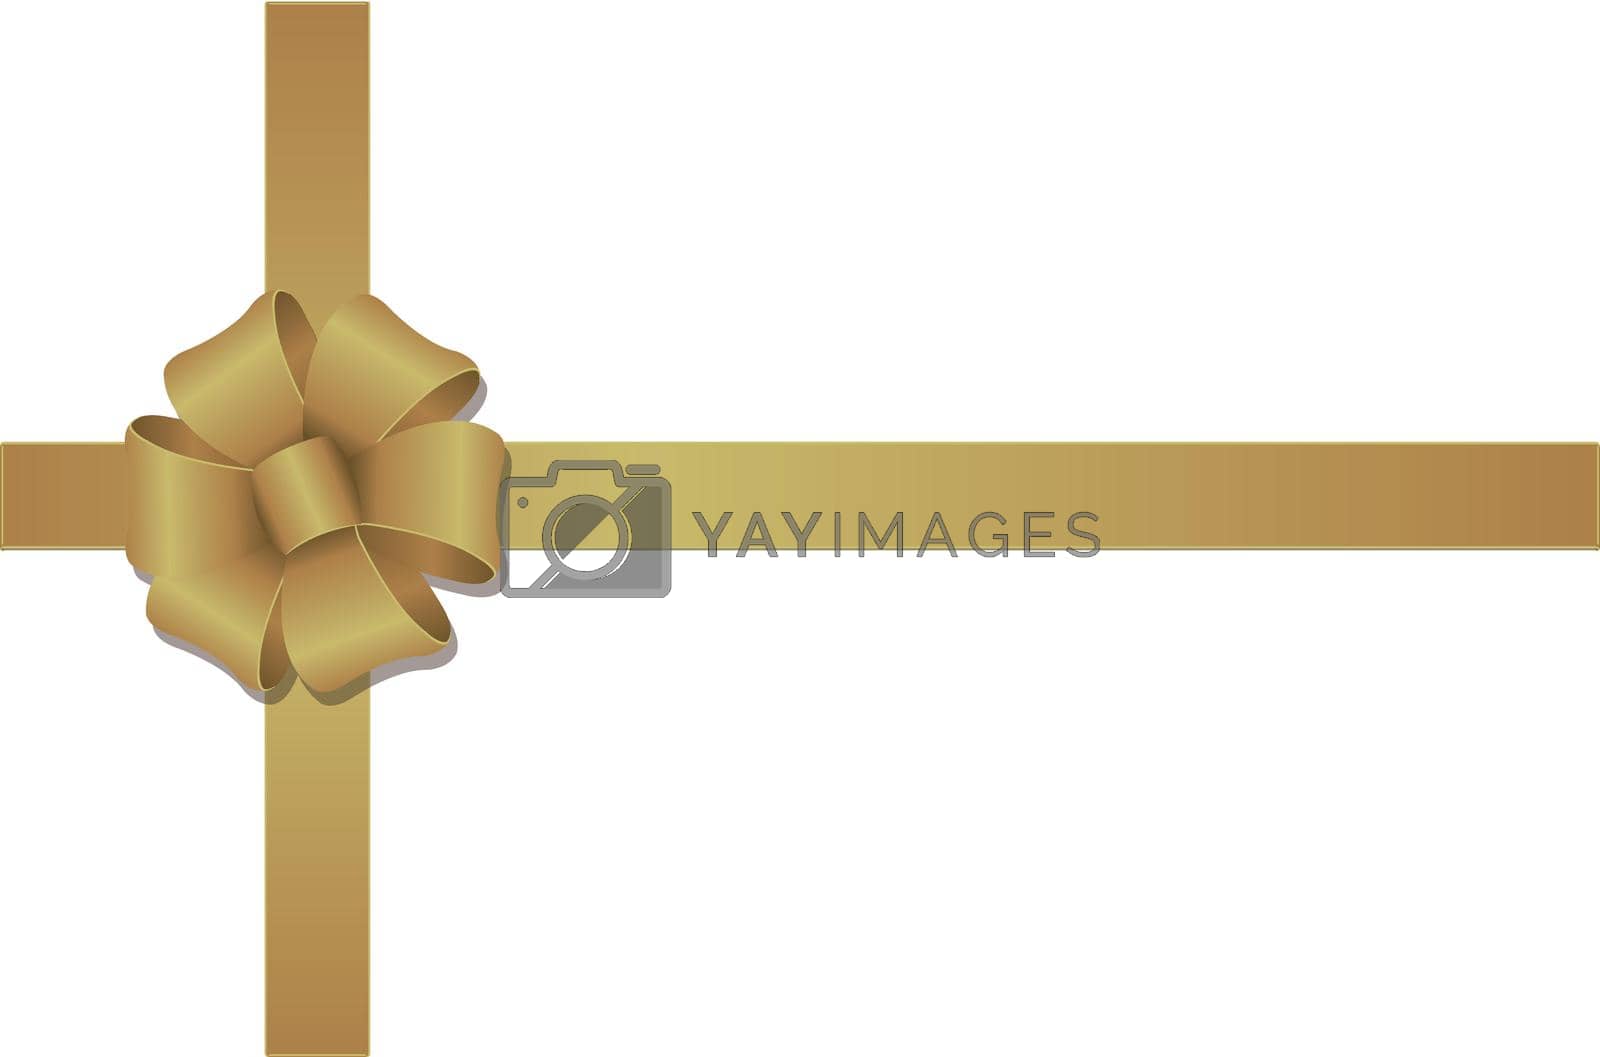 Royalty free image of Crossed ribbons and flower loop hair bow by barks